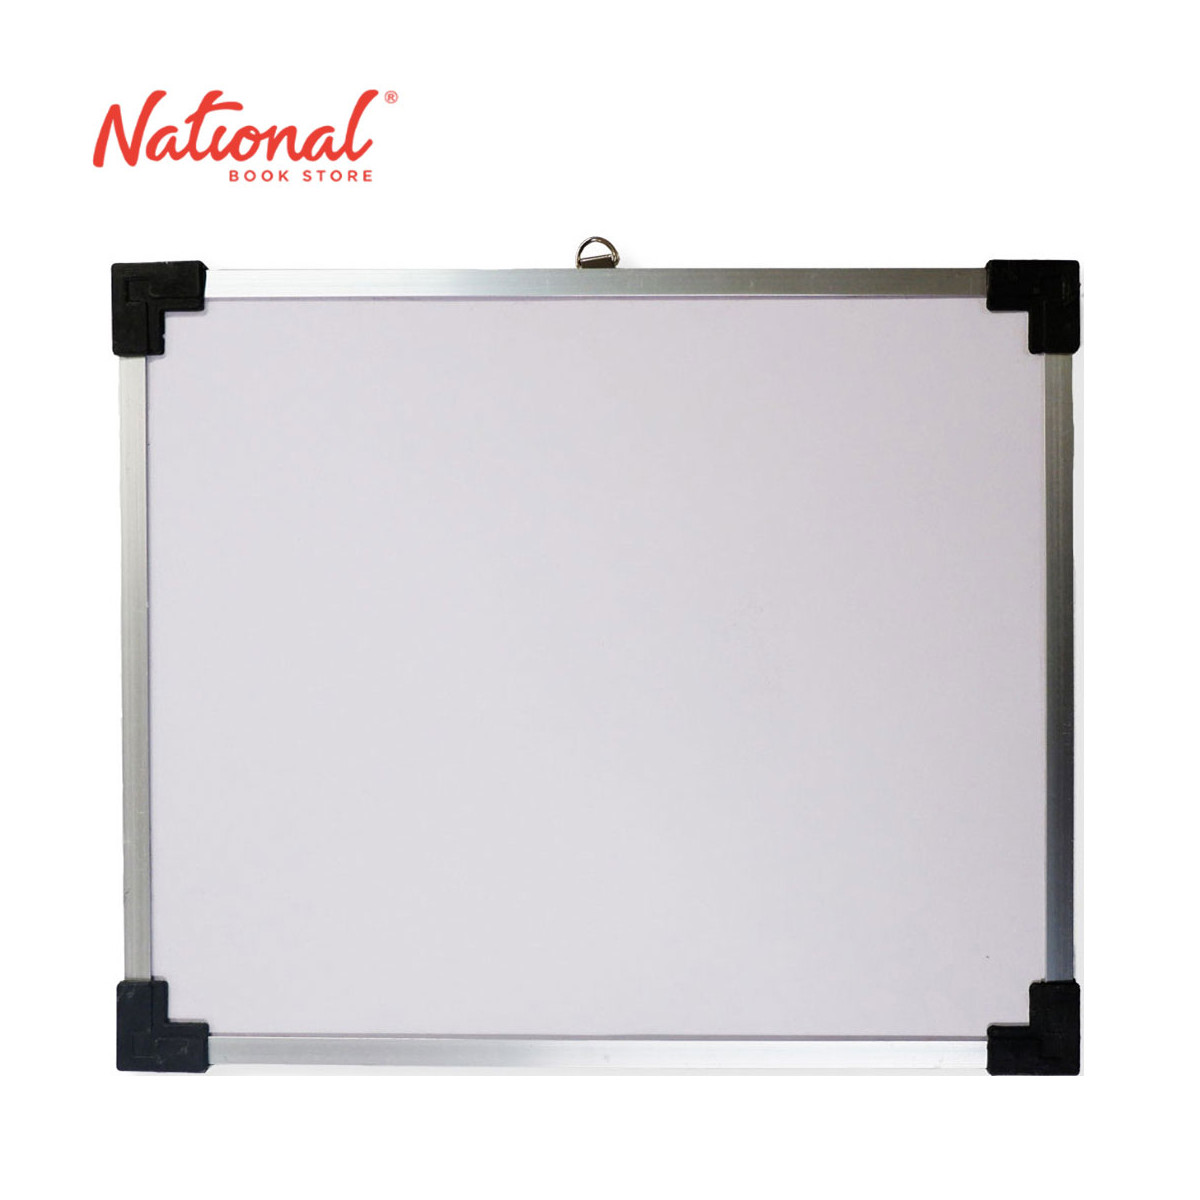 *PRE-ORDER* Sonoma Whiteboard 24 inches x 18 inches Magnetic